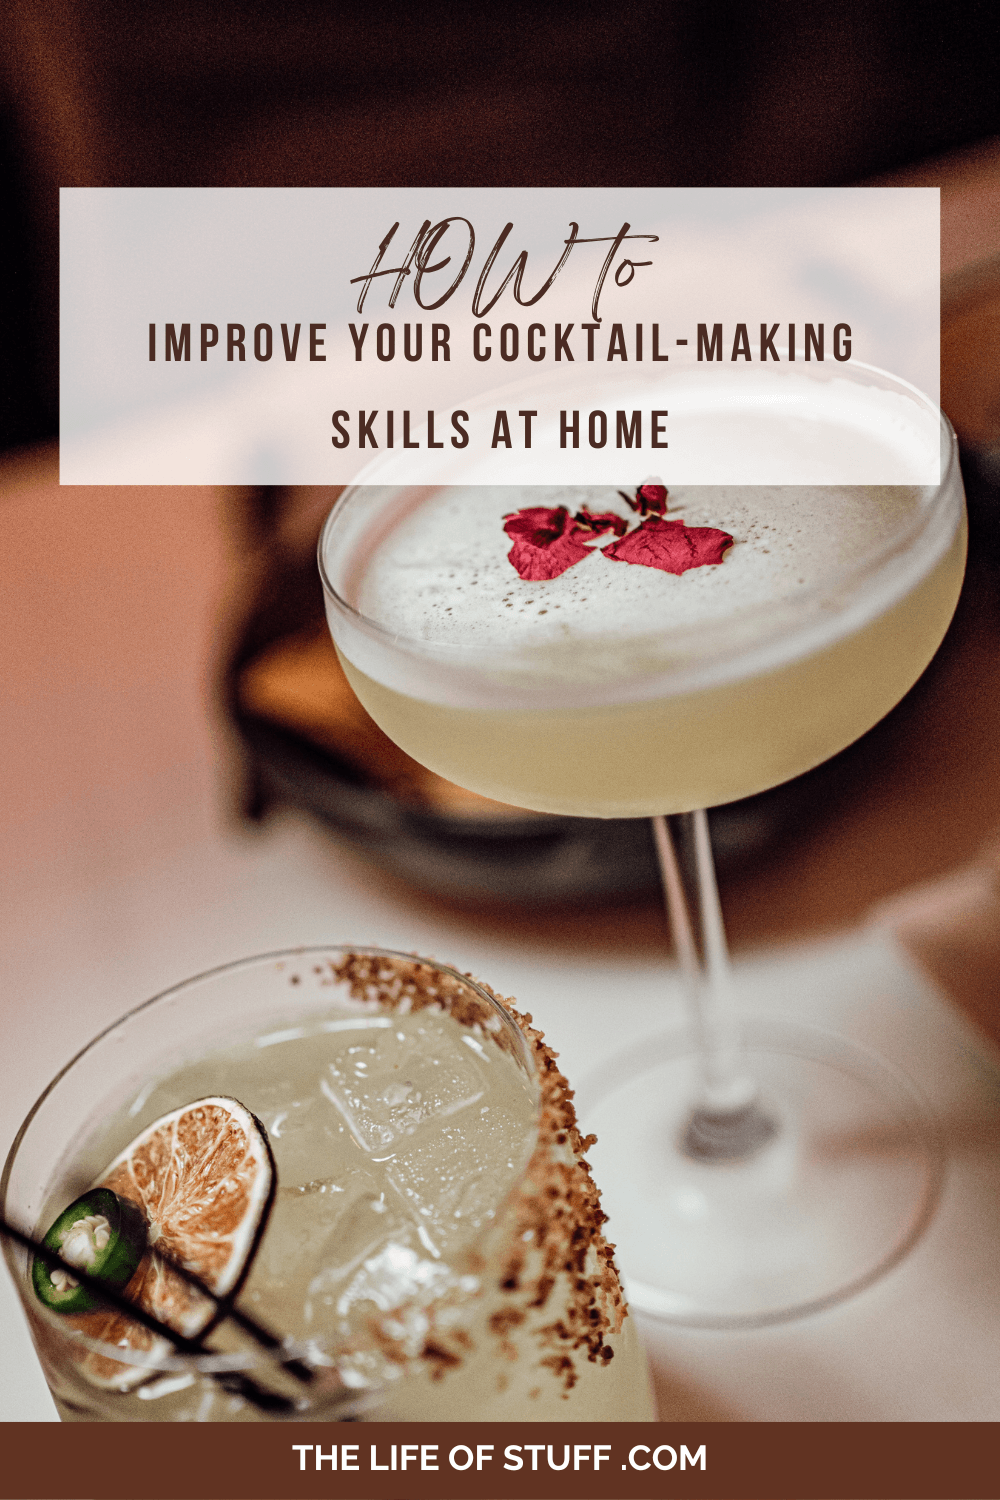 How To Improve Your Cocktail-Making Skills At Home - The Life of Stuff